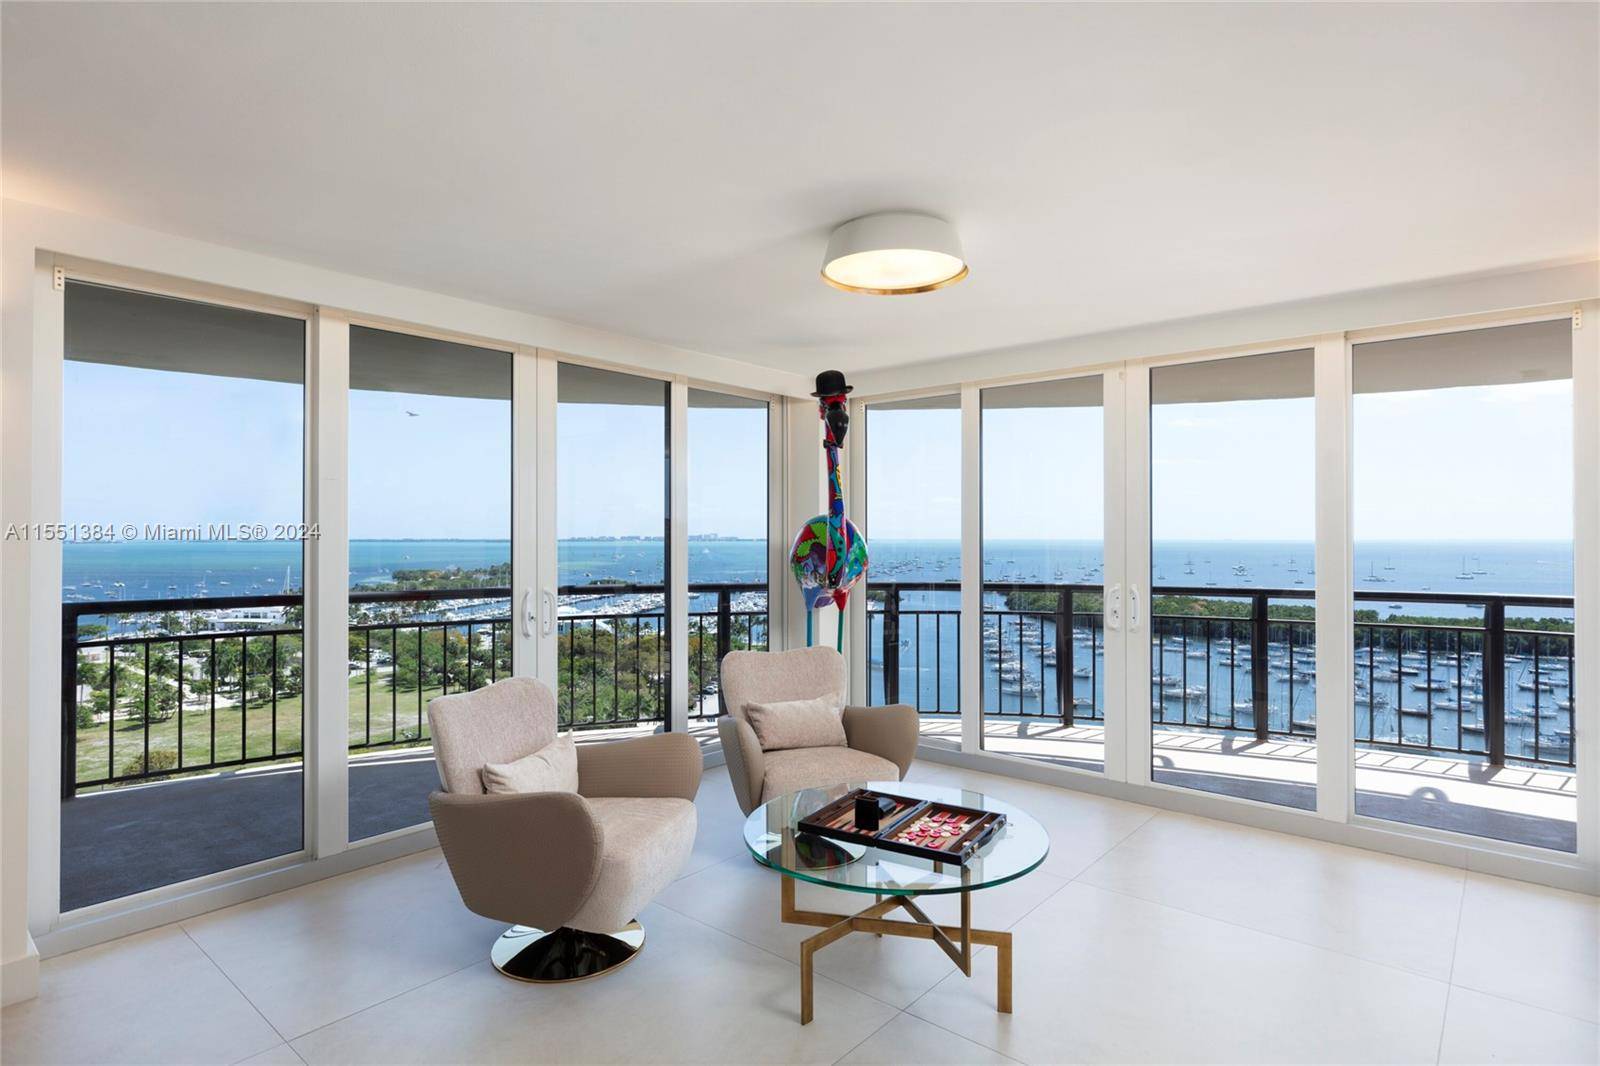 A modern haven in the sky with the most PRICELESS views in all of Coconut Grove.